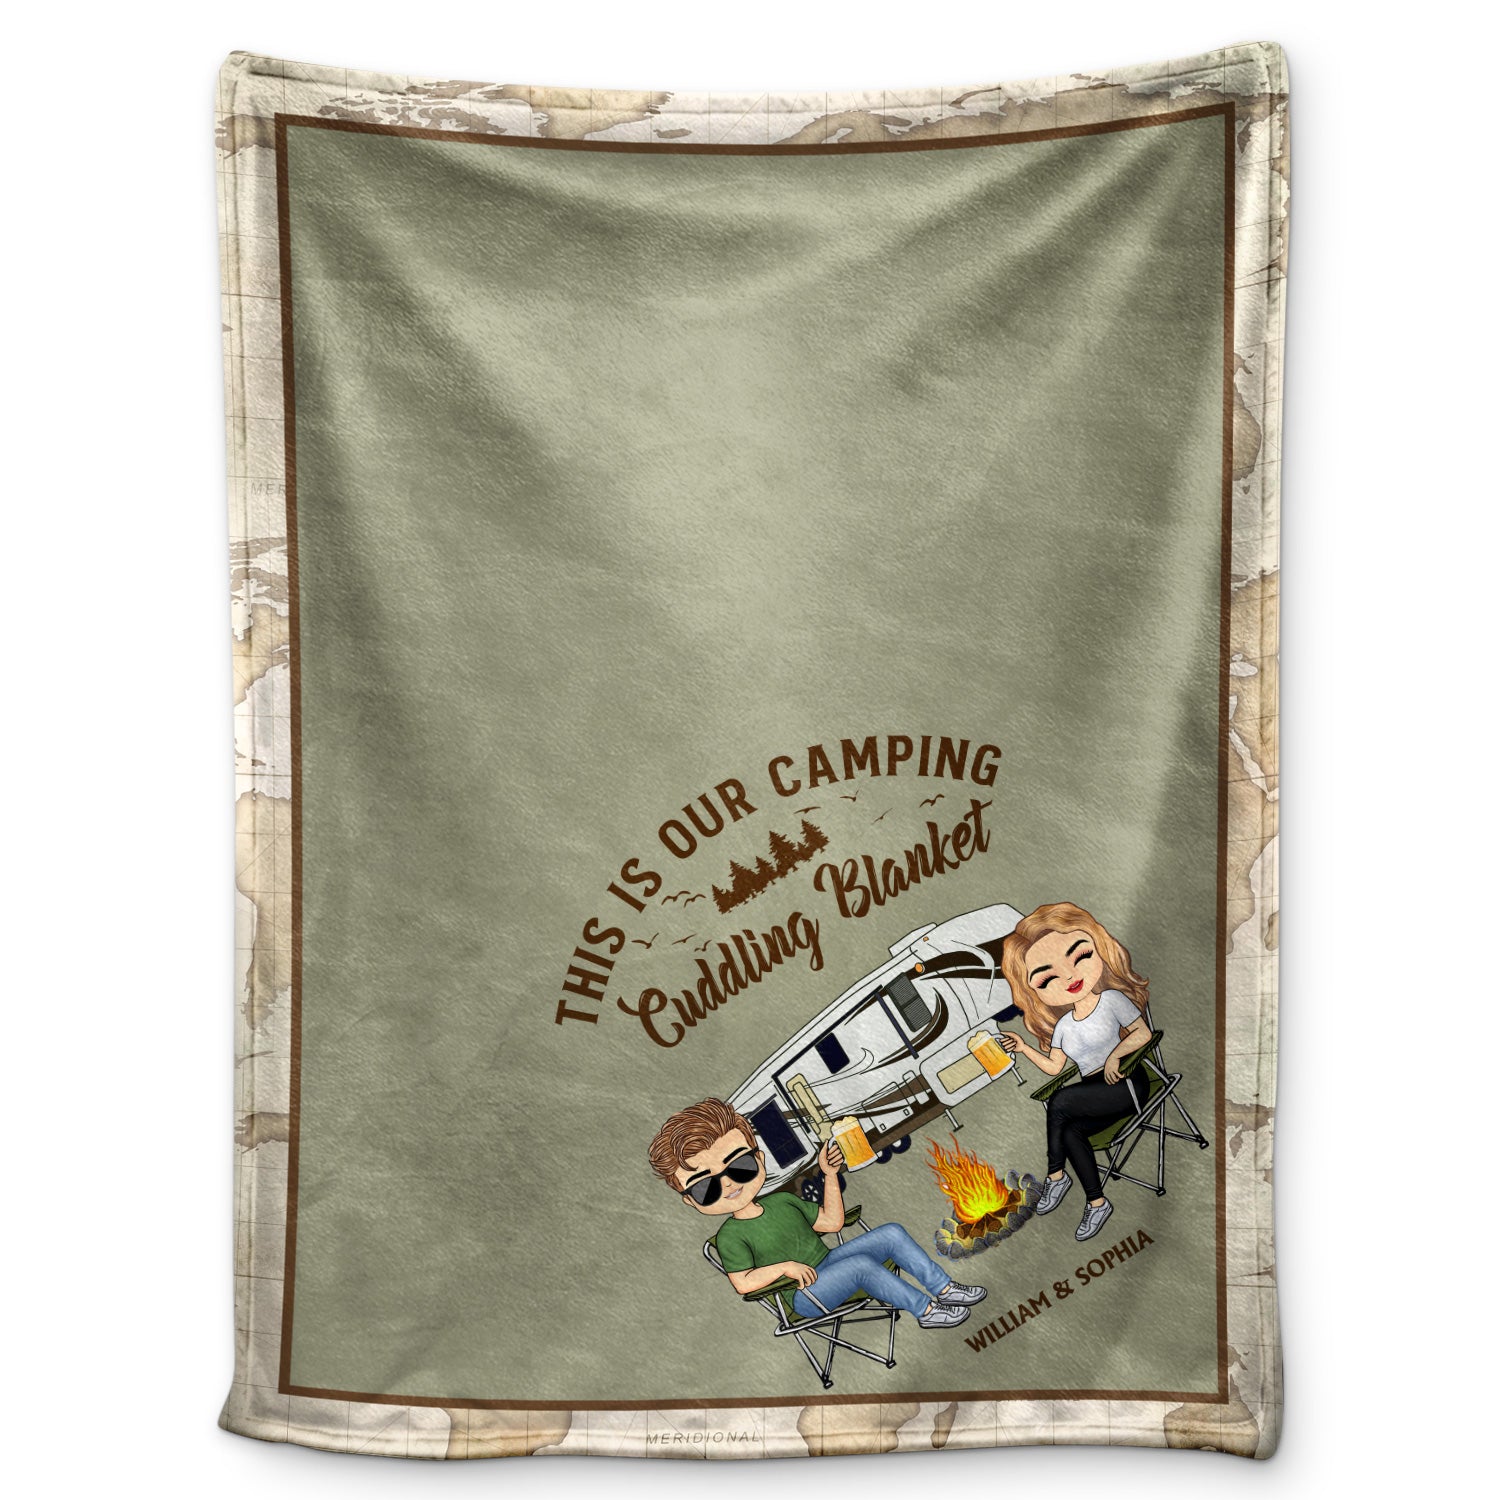 This Is Our Camping Cuddling Blanket Camping - Anniversary, Birthday Gift For Spouse, Husband, Wife, Boyfriend, Girlfriend - Personalized Custom Fleece Blanket